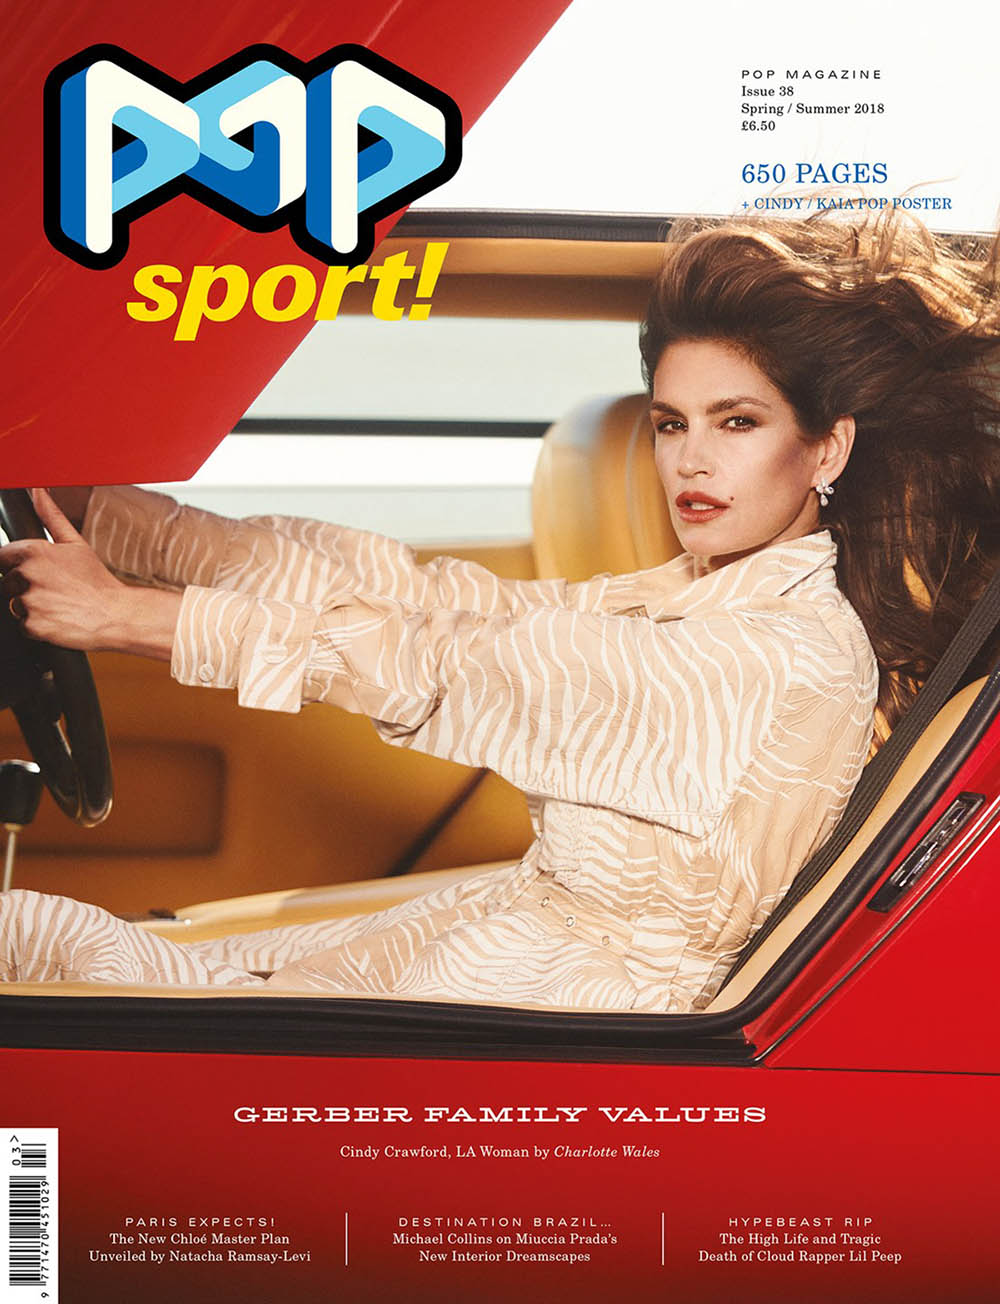 Cindy Crawford covers POP Magazine Spring Summer 2018 by Charlotte Wales